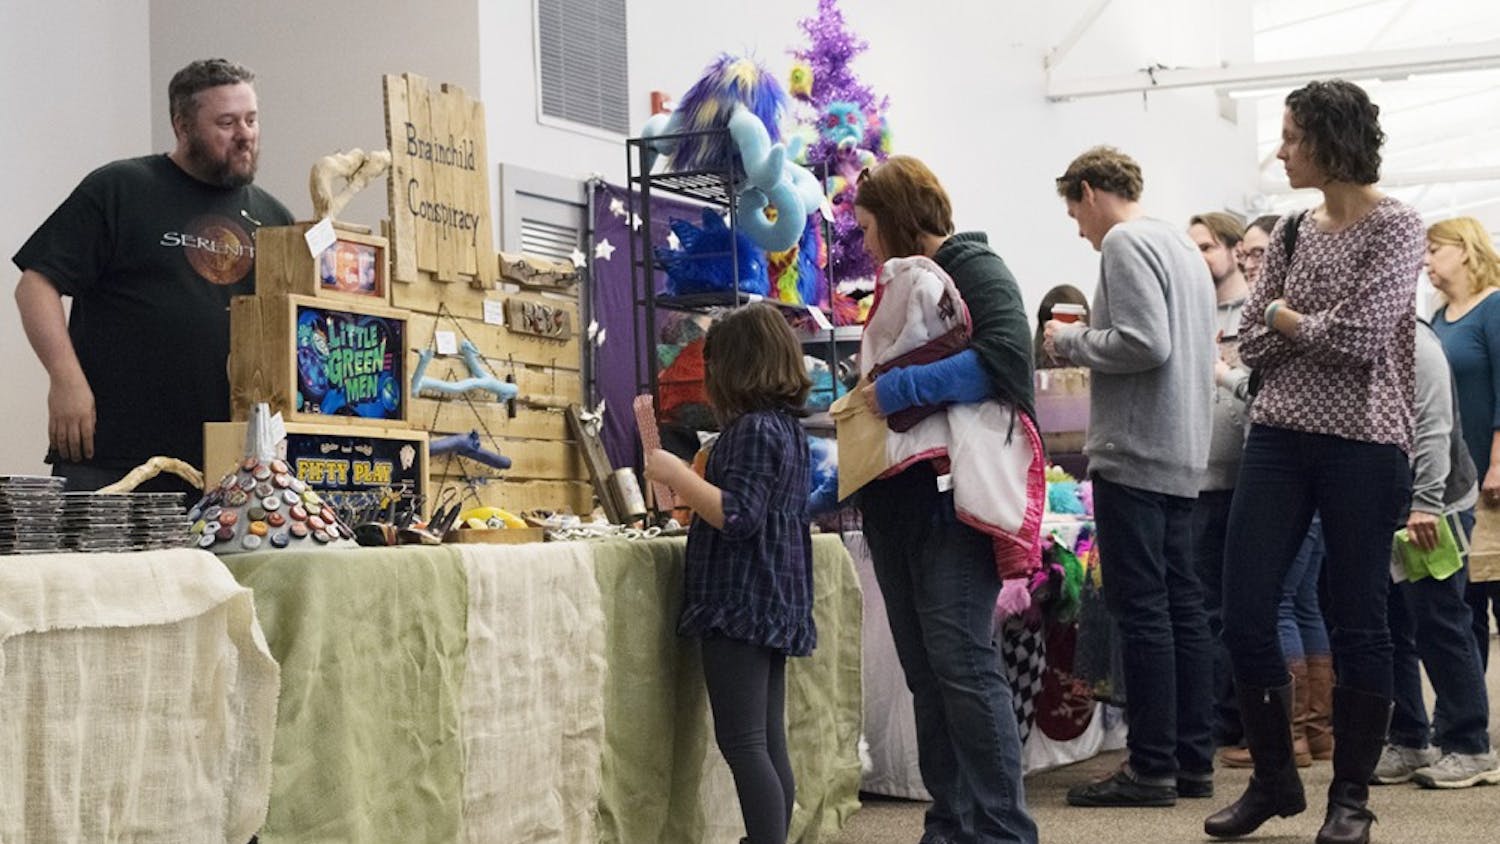 Some vendors, like Brainchild Conspiracy, appeal to children and adults alike. Hundreds of visitors go to the Bloomington Convention Center to browse among local and handmade products. Approximately $30,000 will be spent supporting local artists and artisans.